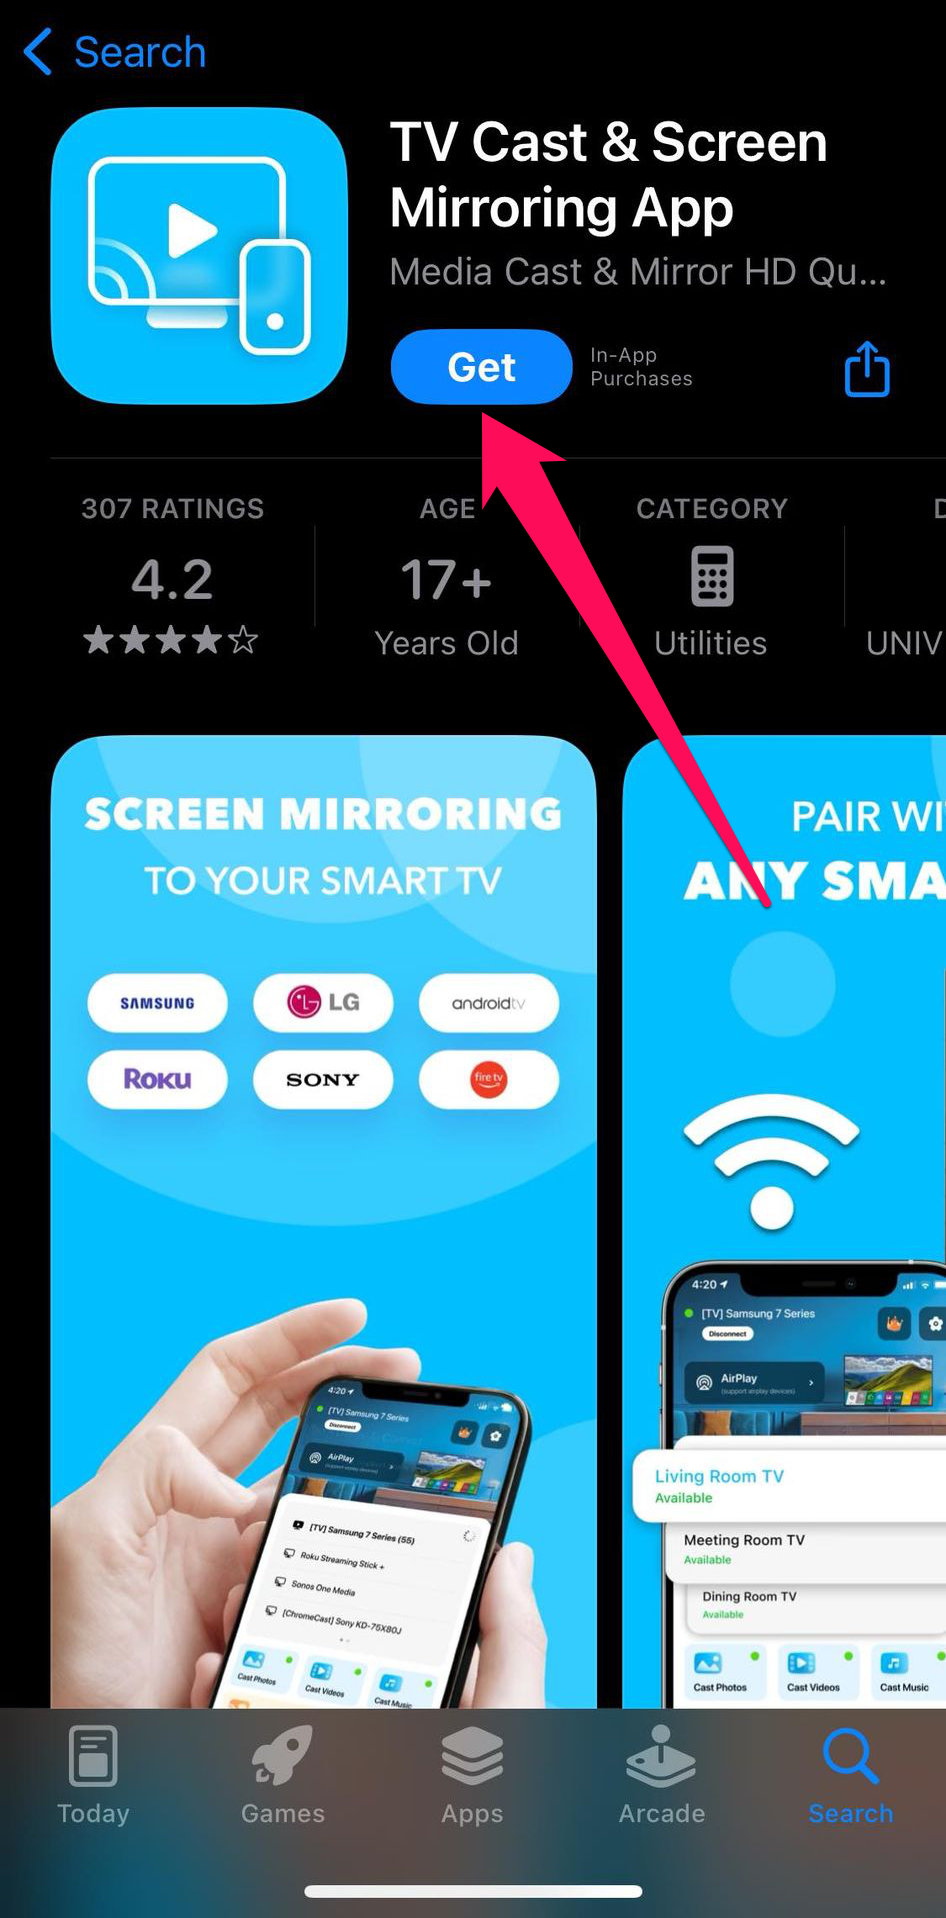 Download TV Cast & Screen Mirroring App on your iPhone